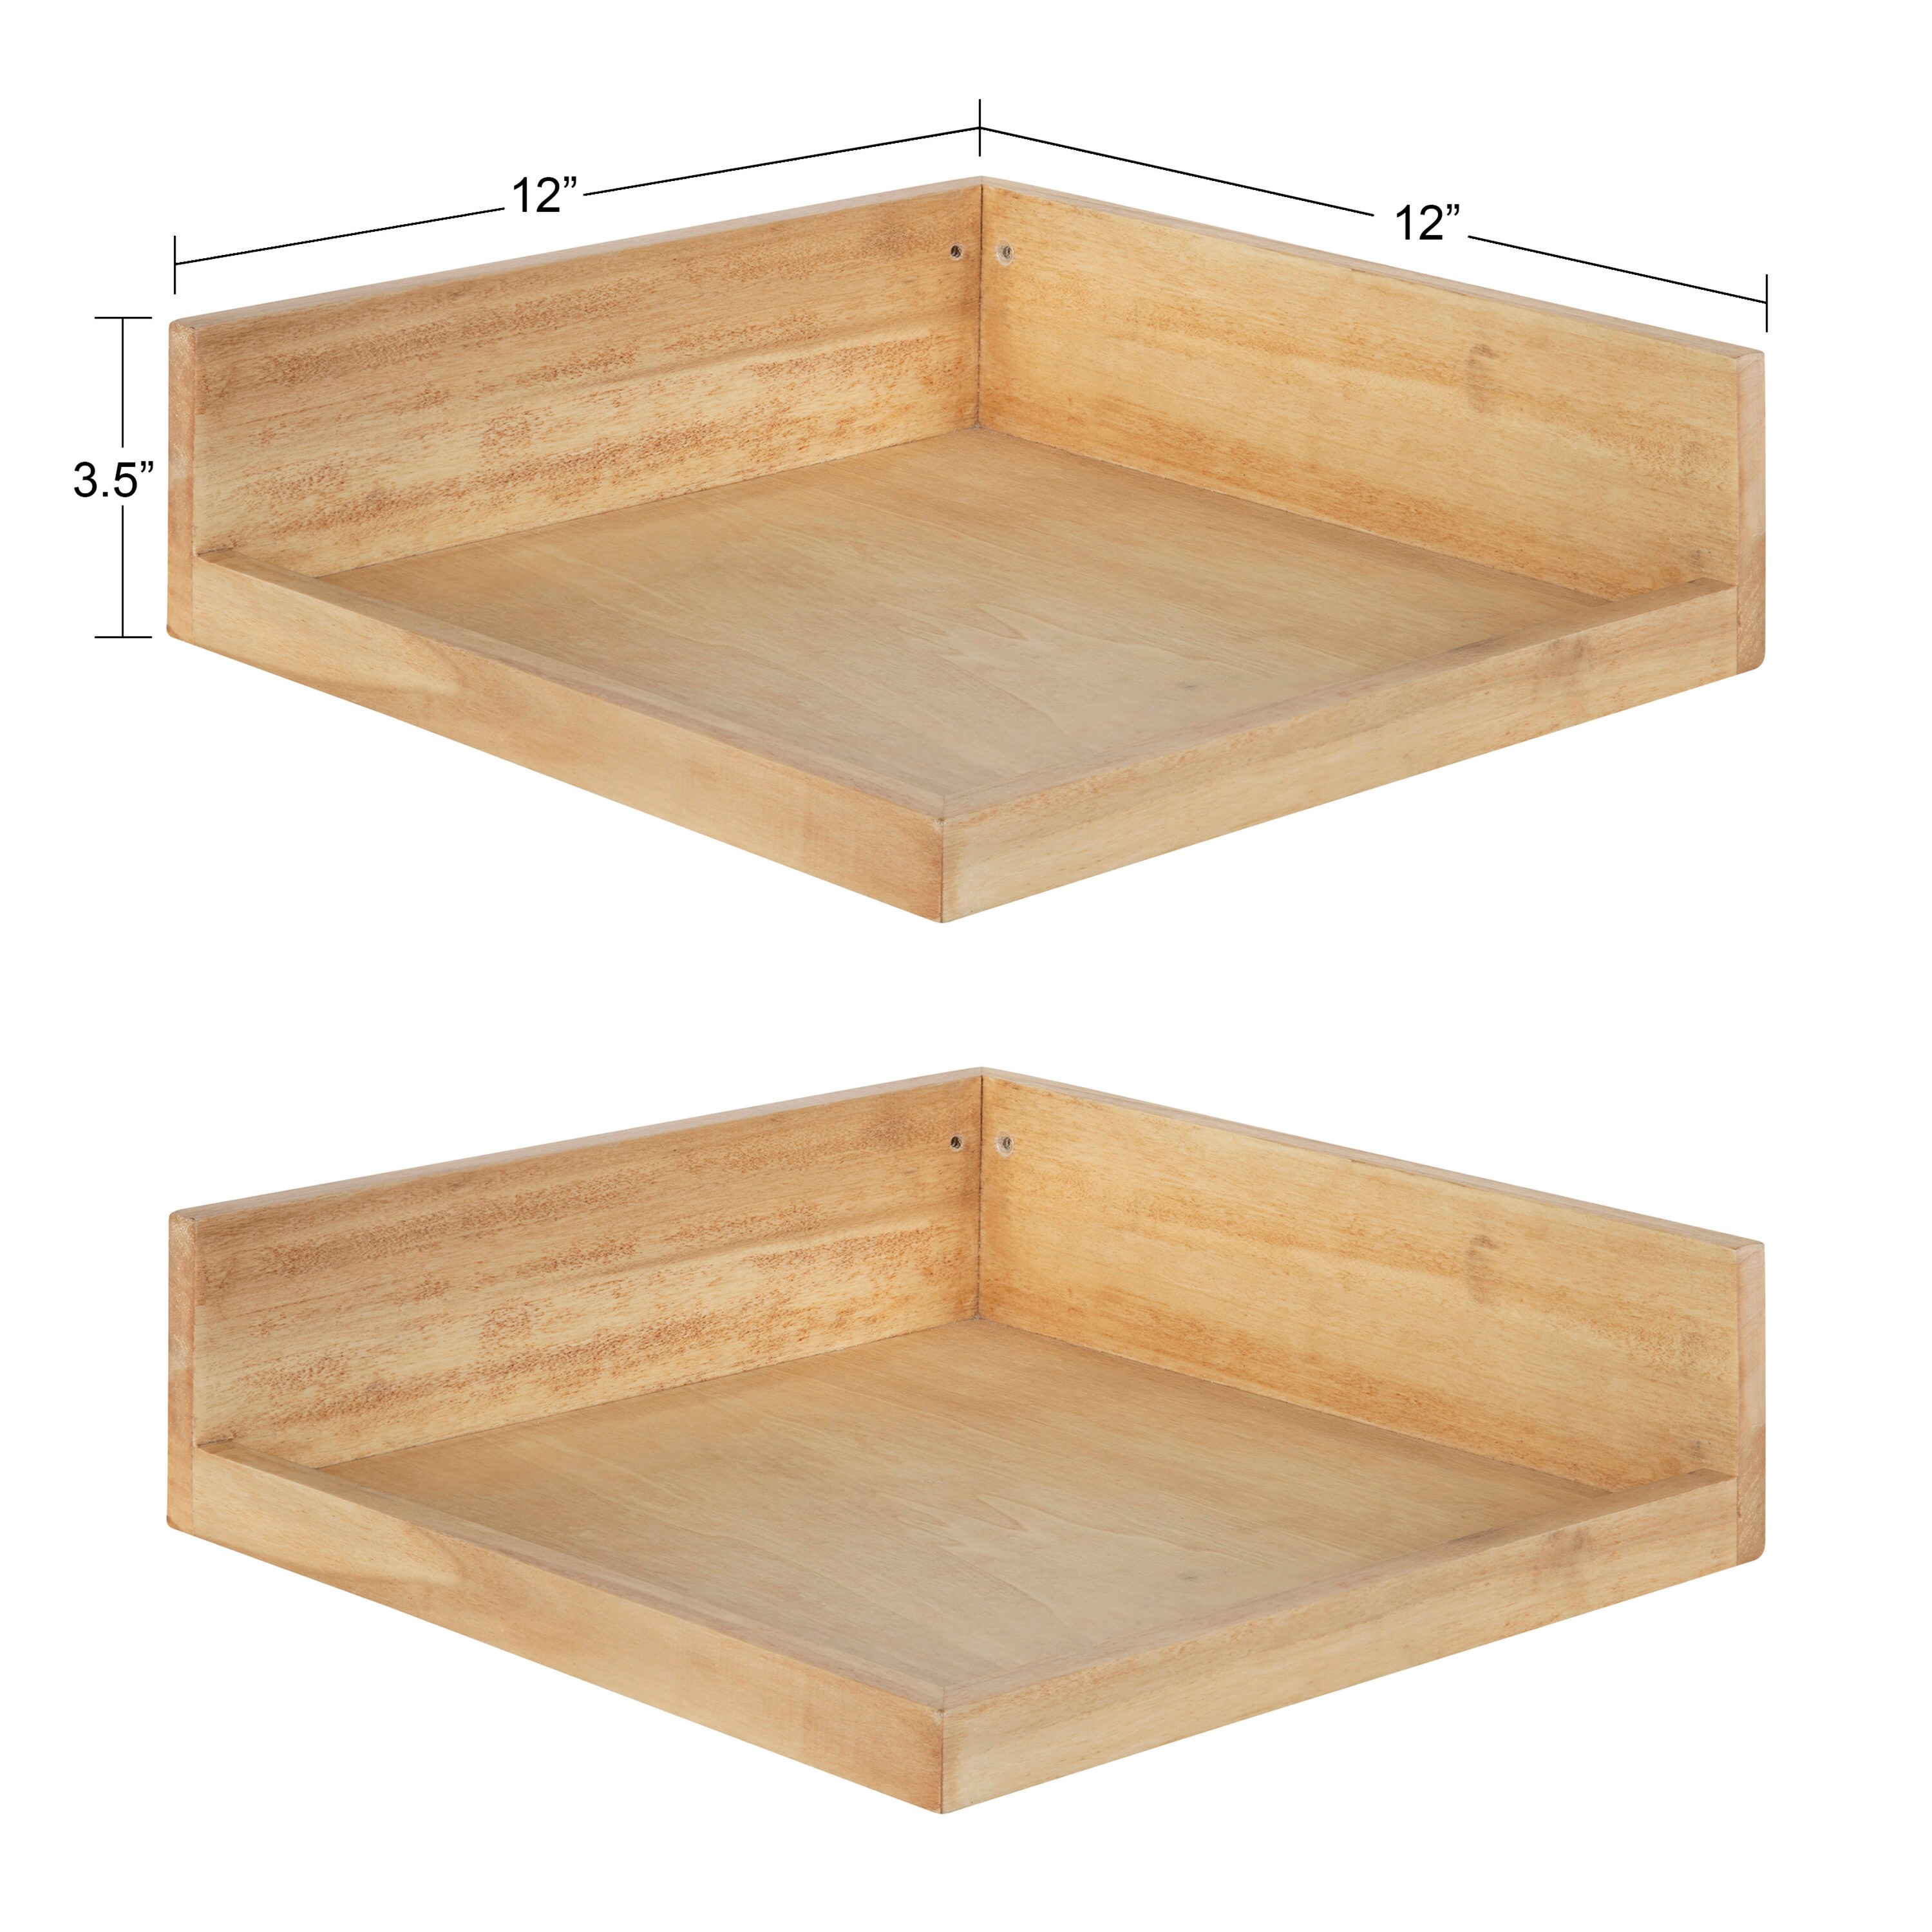 Kate and Laurel 12-in L x 12-in D x 3.5-in H Natural Wood Corner Square ...